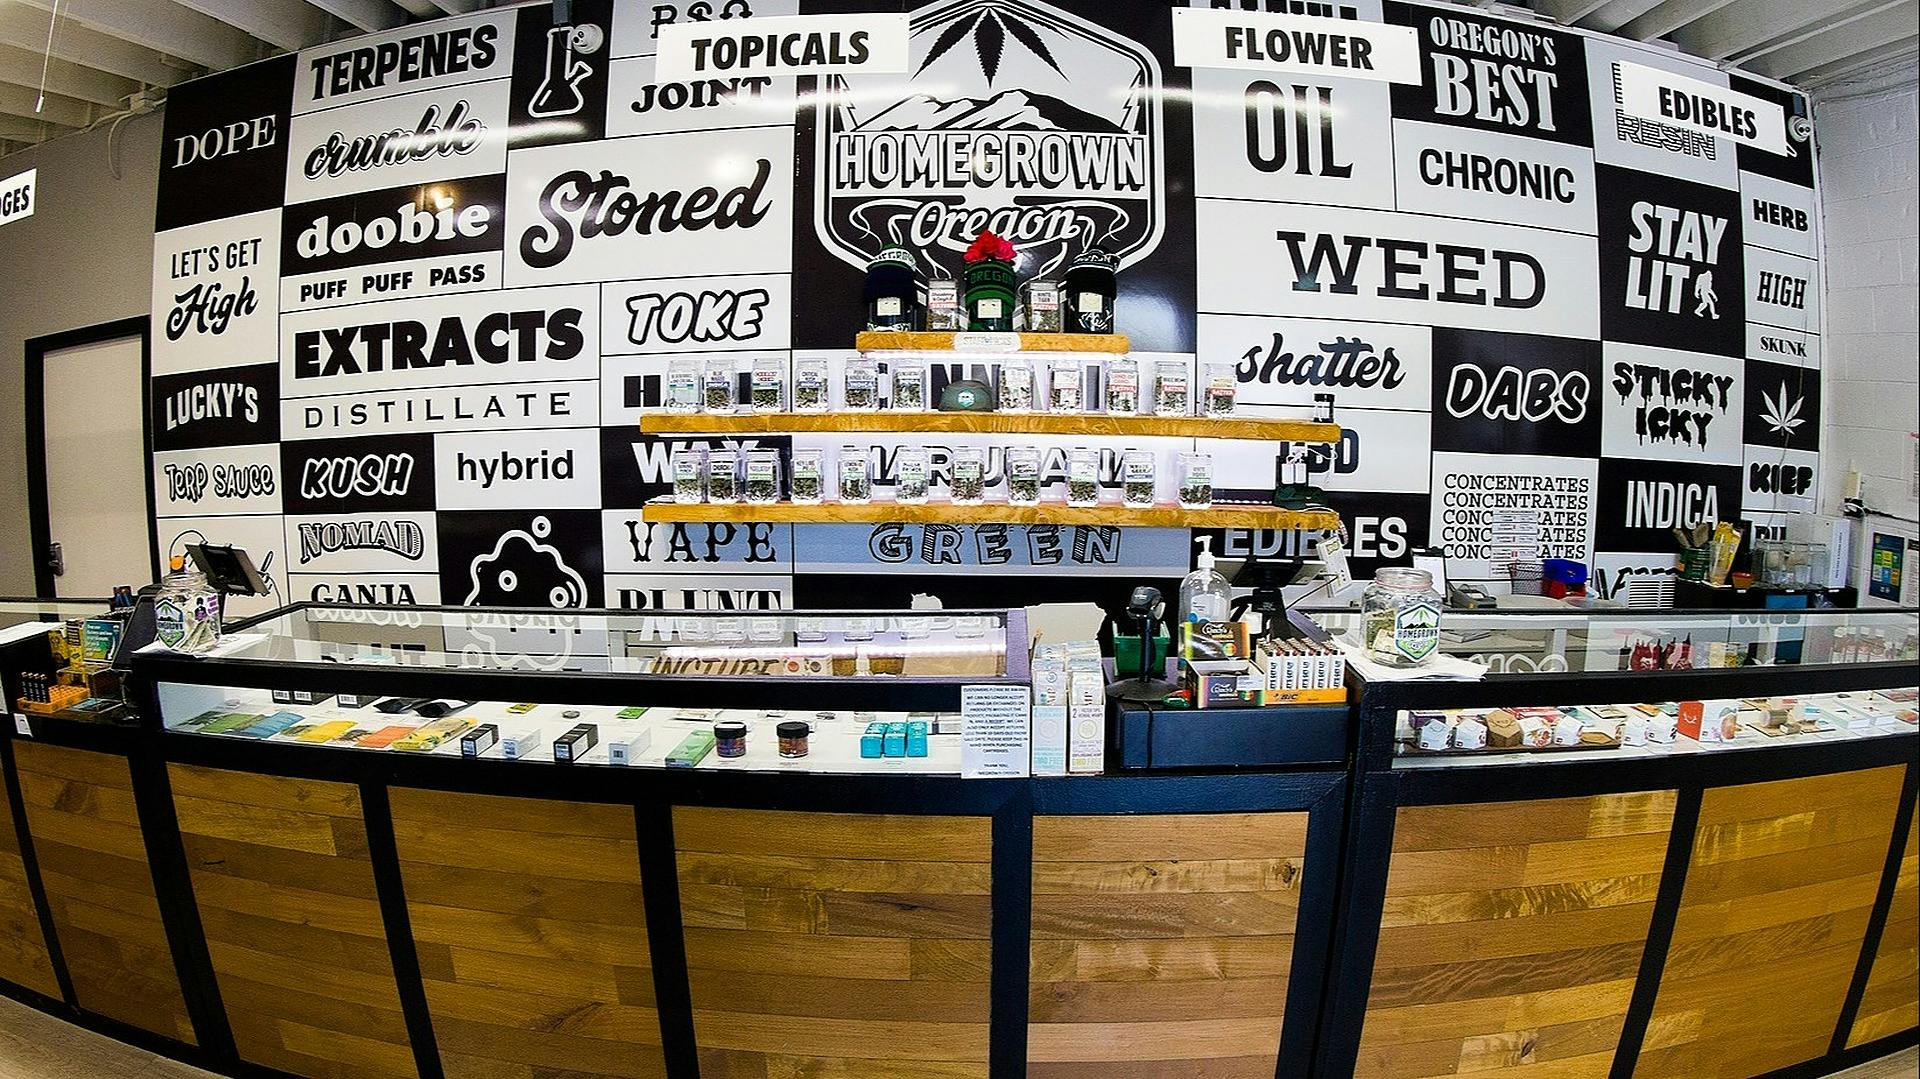 Homegrown Oregon - Liberty Store | Salem, OR Dispensary | Leafly